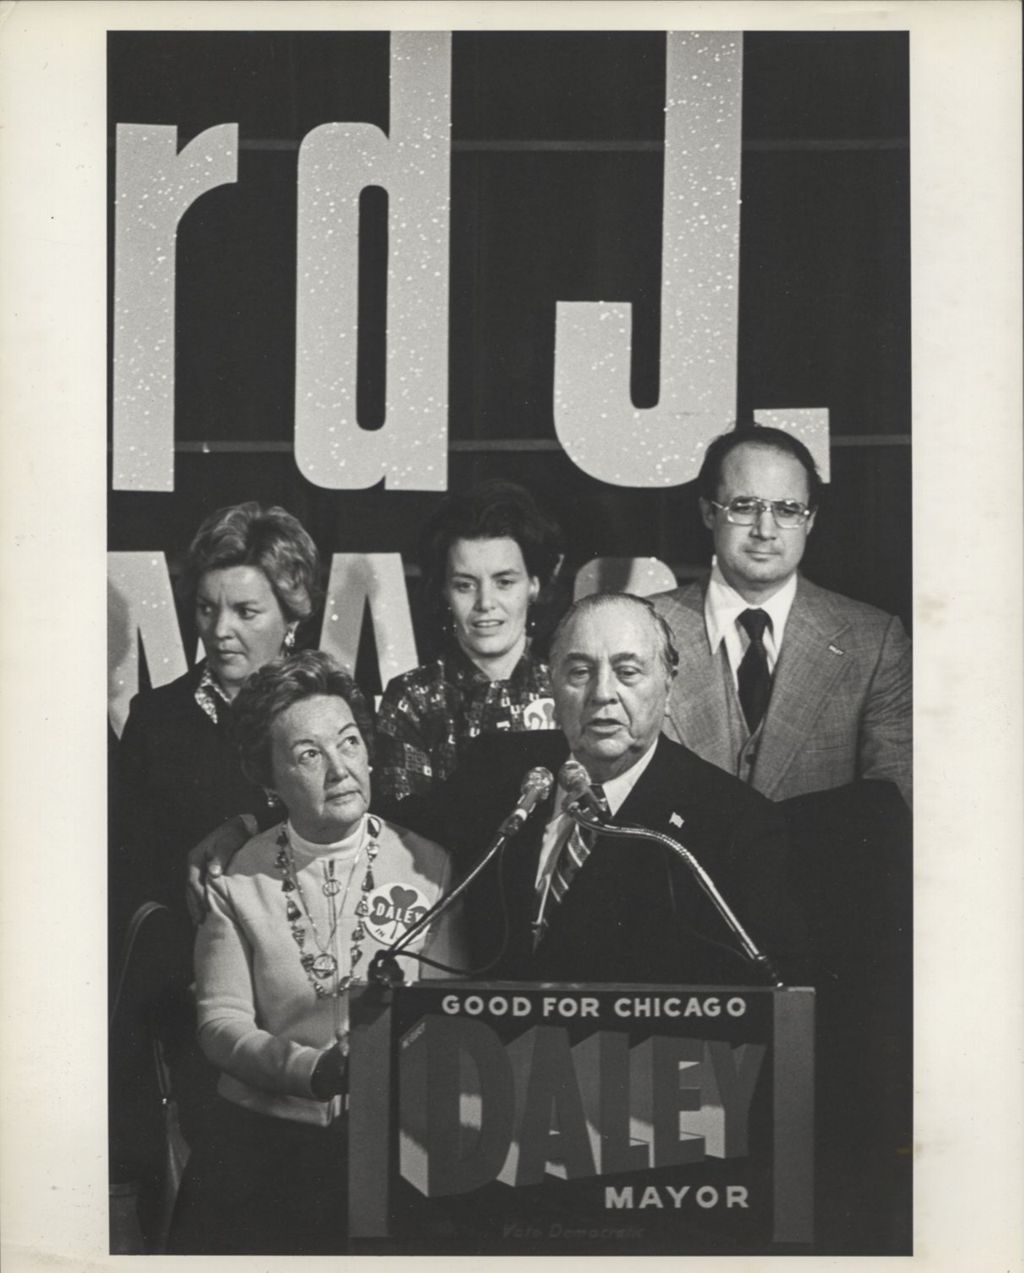 Miniature of Richard J. Daley speaking at an election event